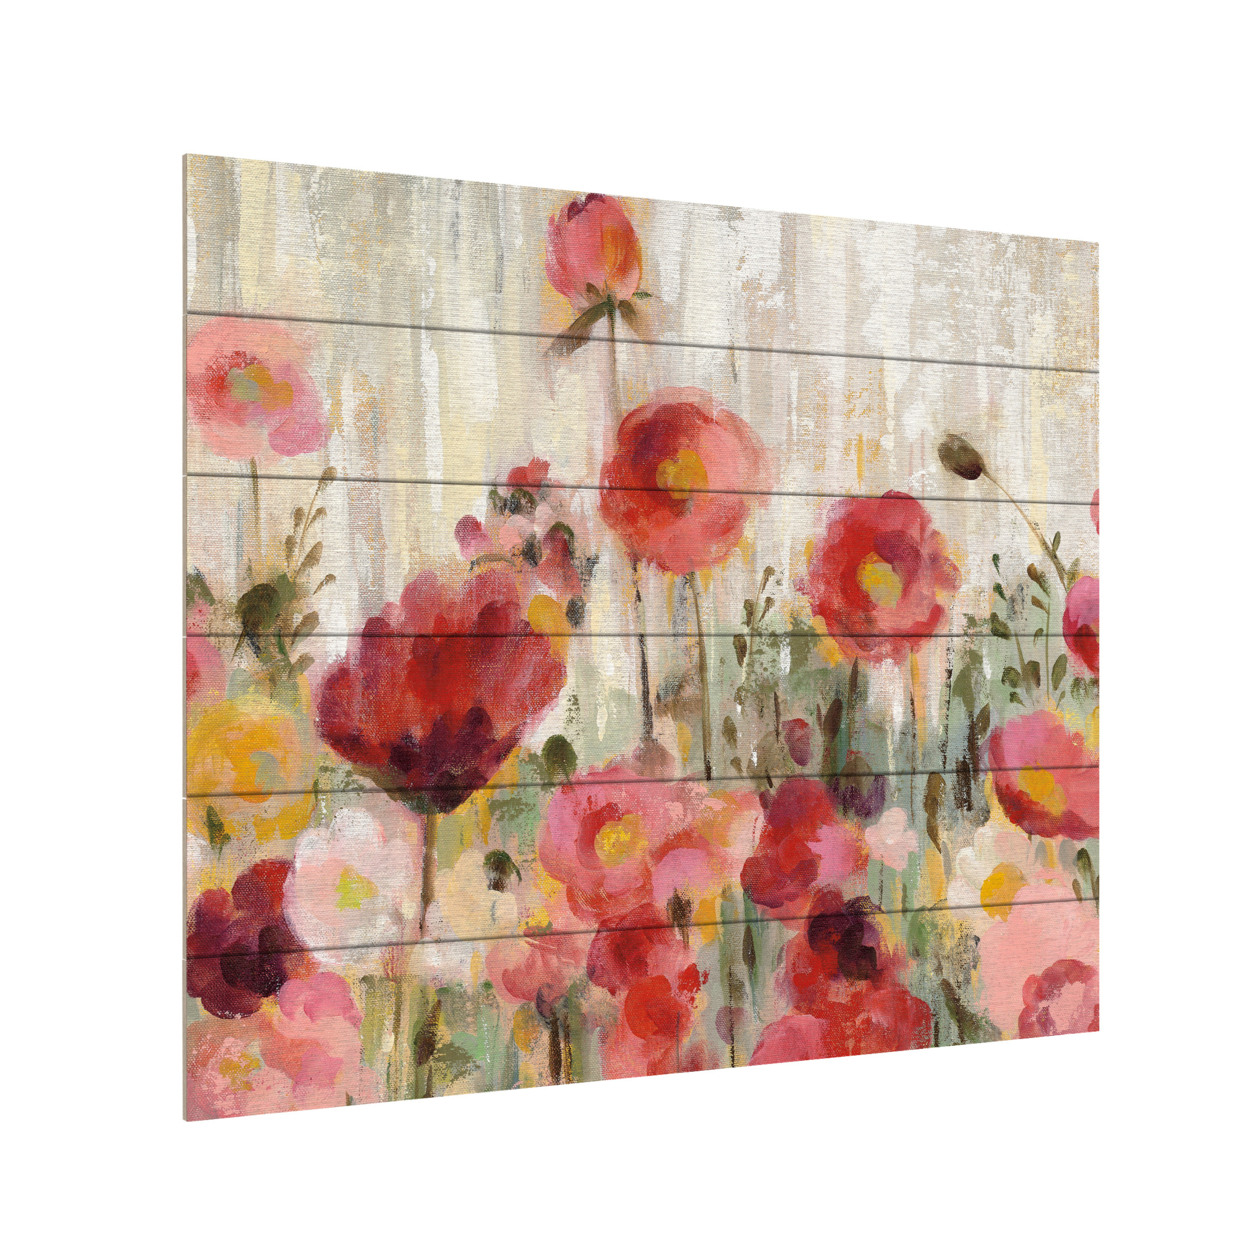 Wooden Slat Art 18 X 22 Inches Titled Sprinkled Flowers Crop Ready To Hang Home Decor Picture